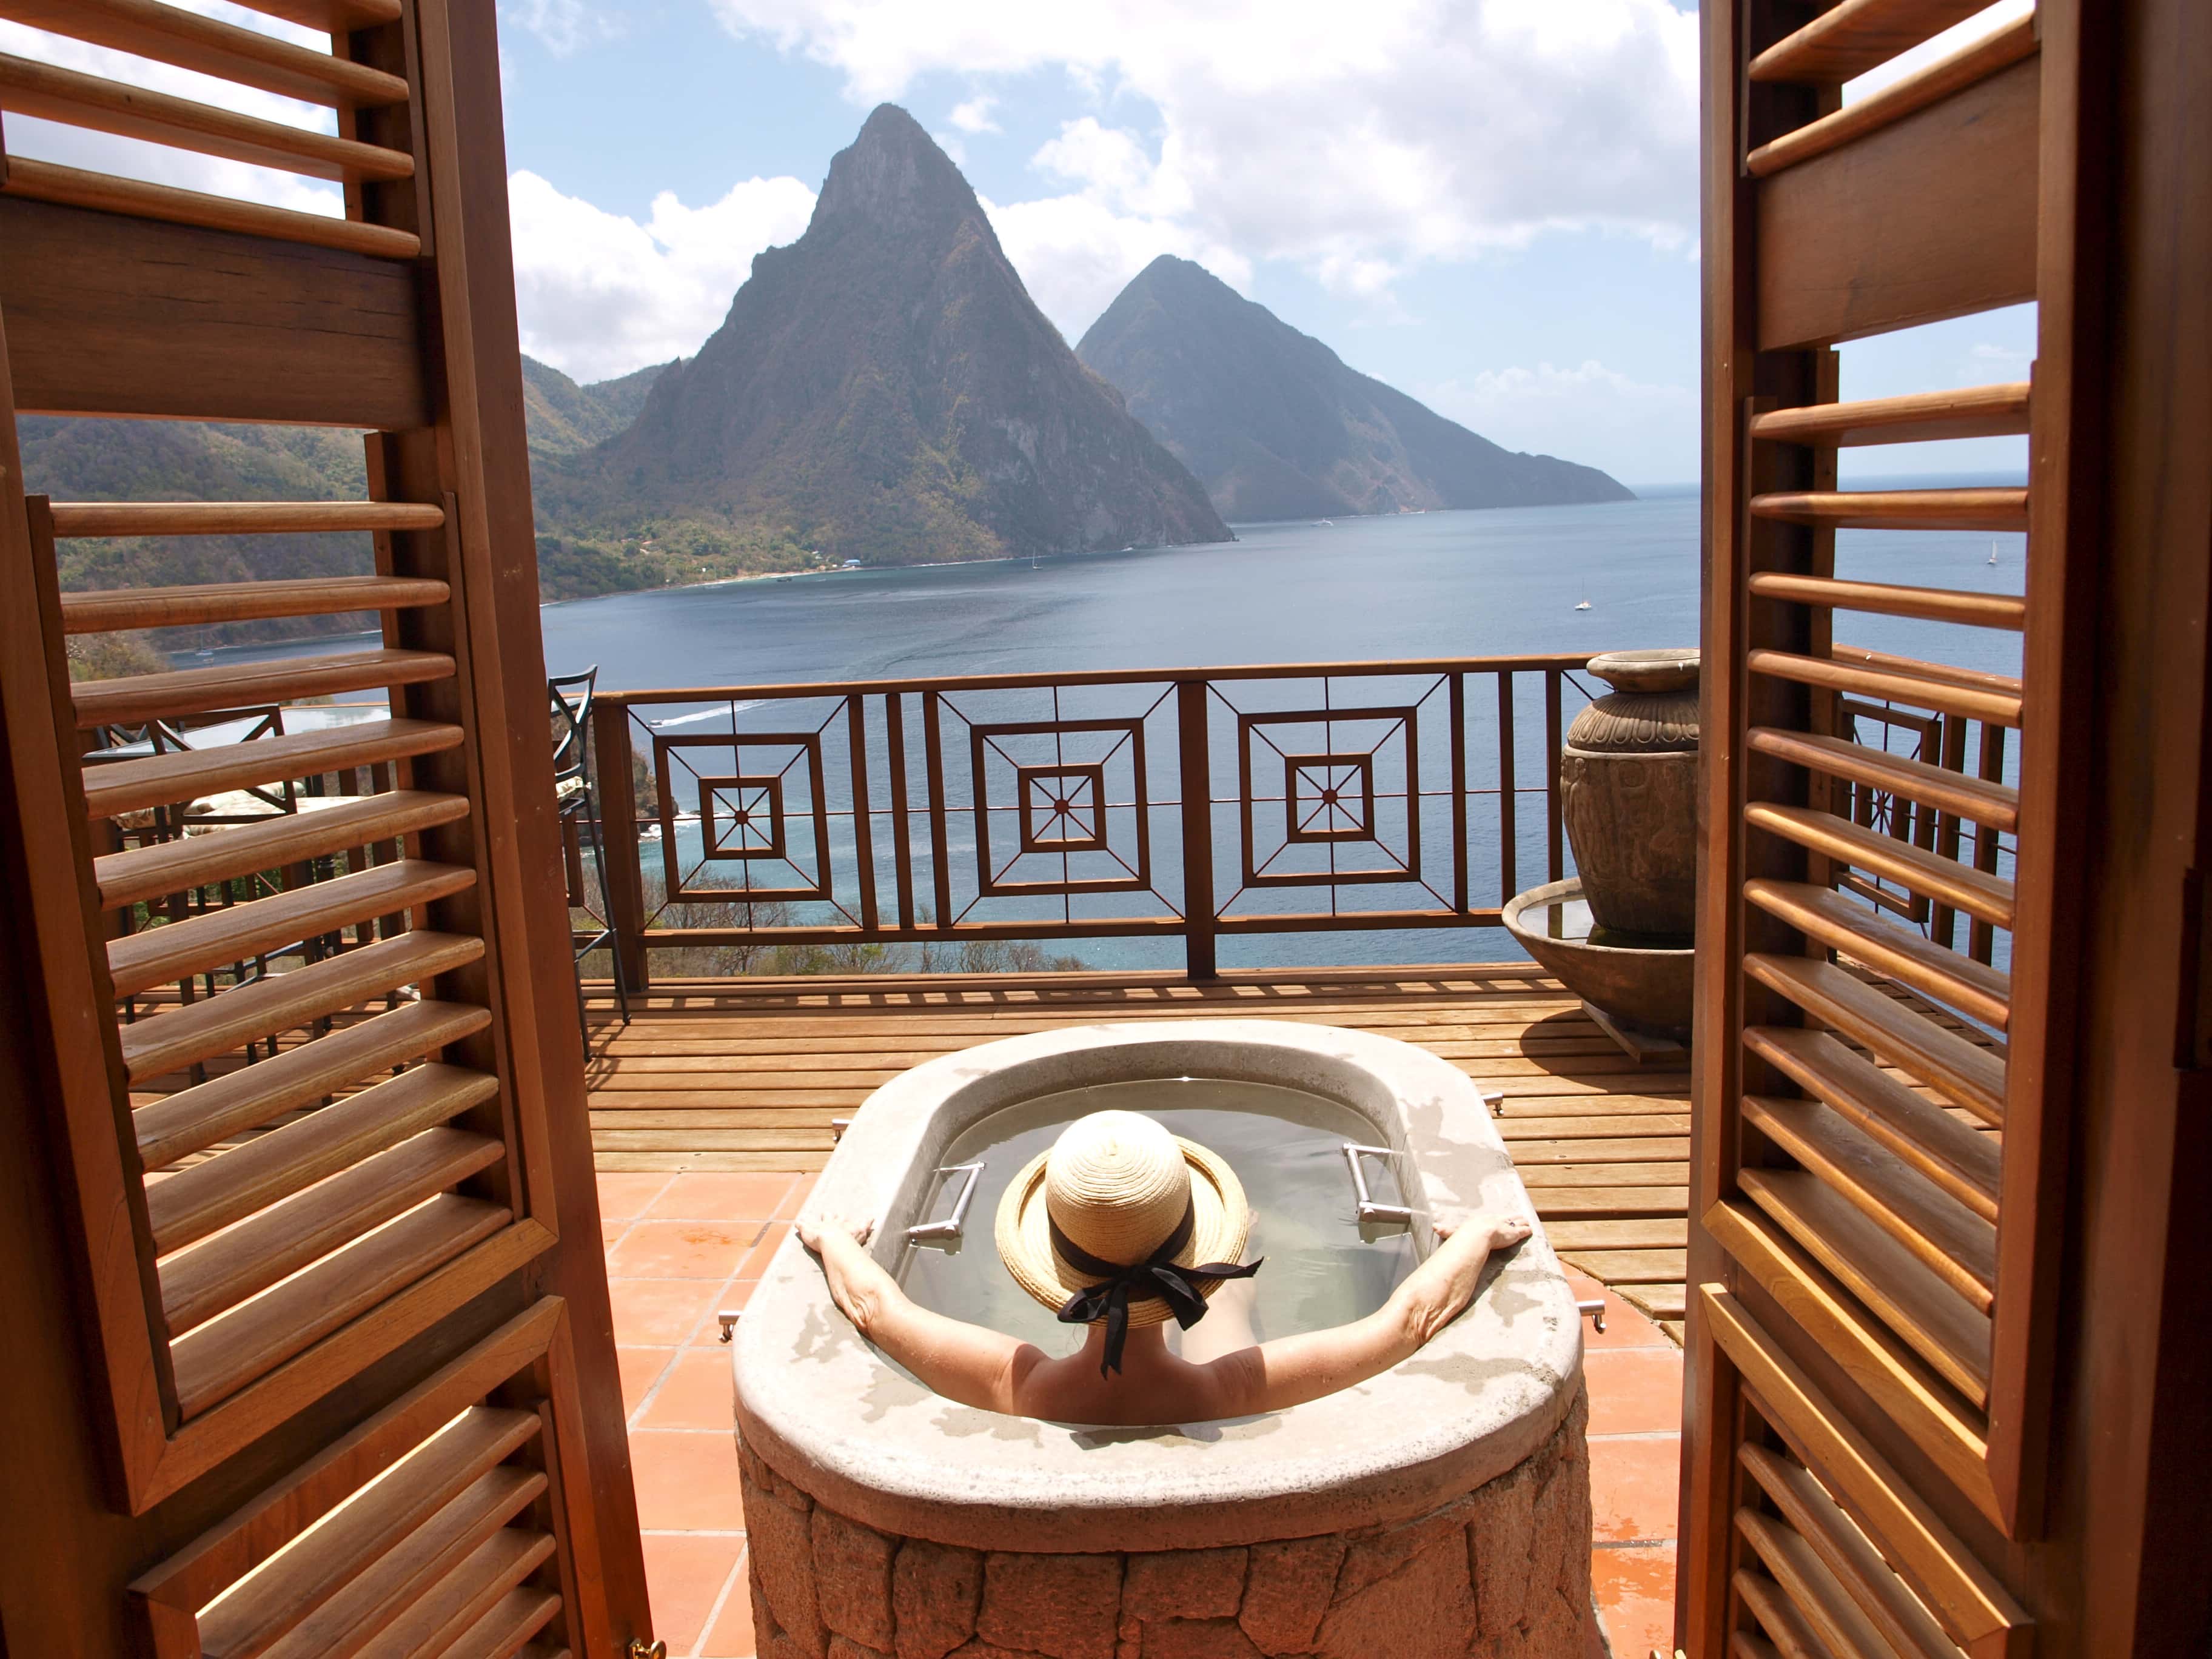 st lucia travel guide